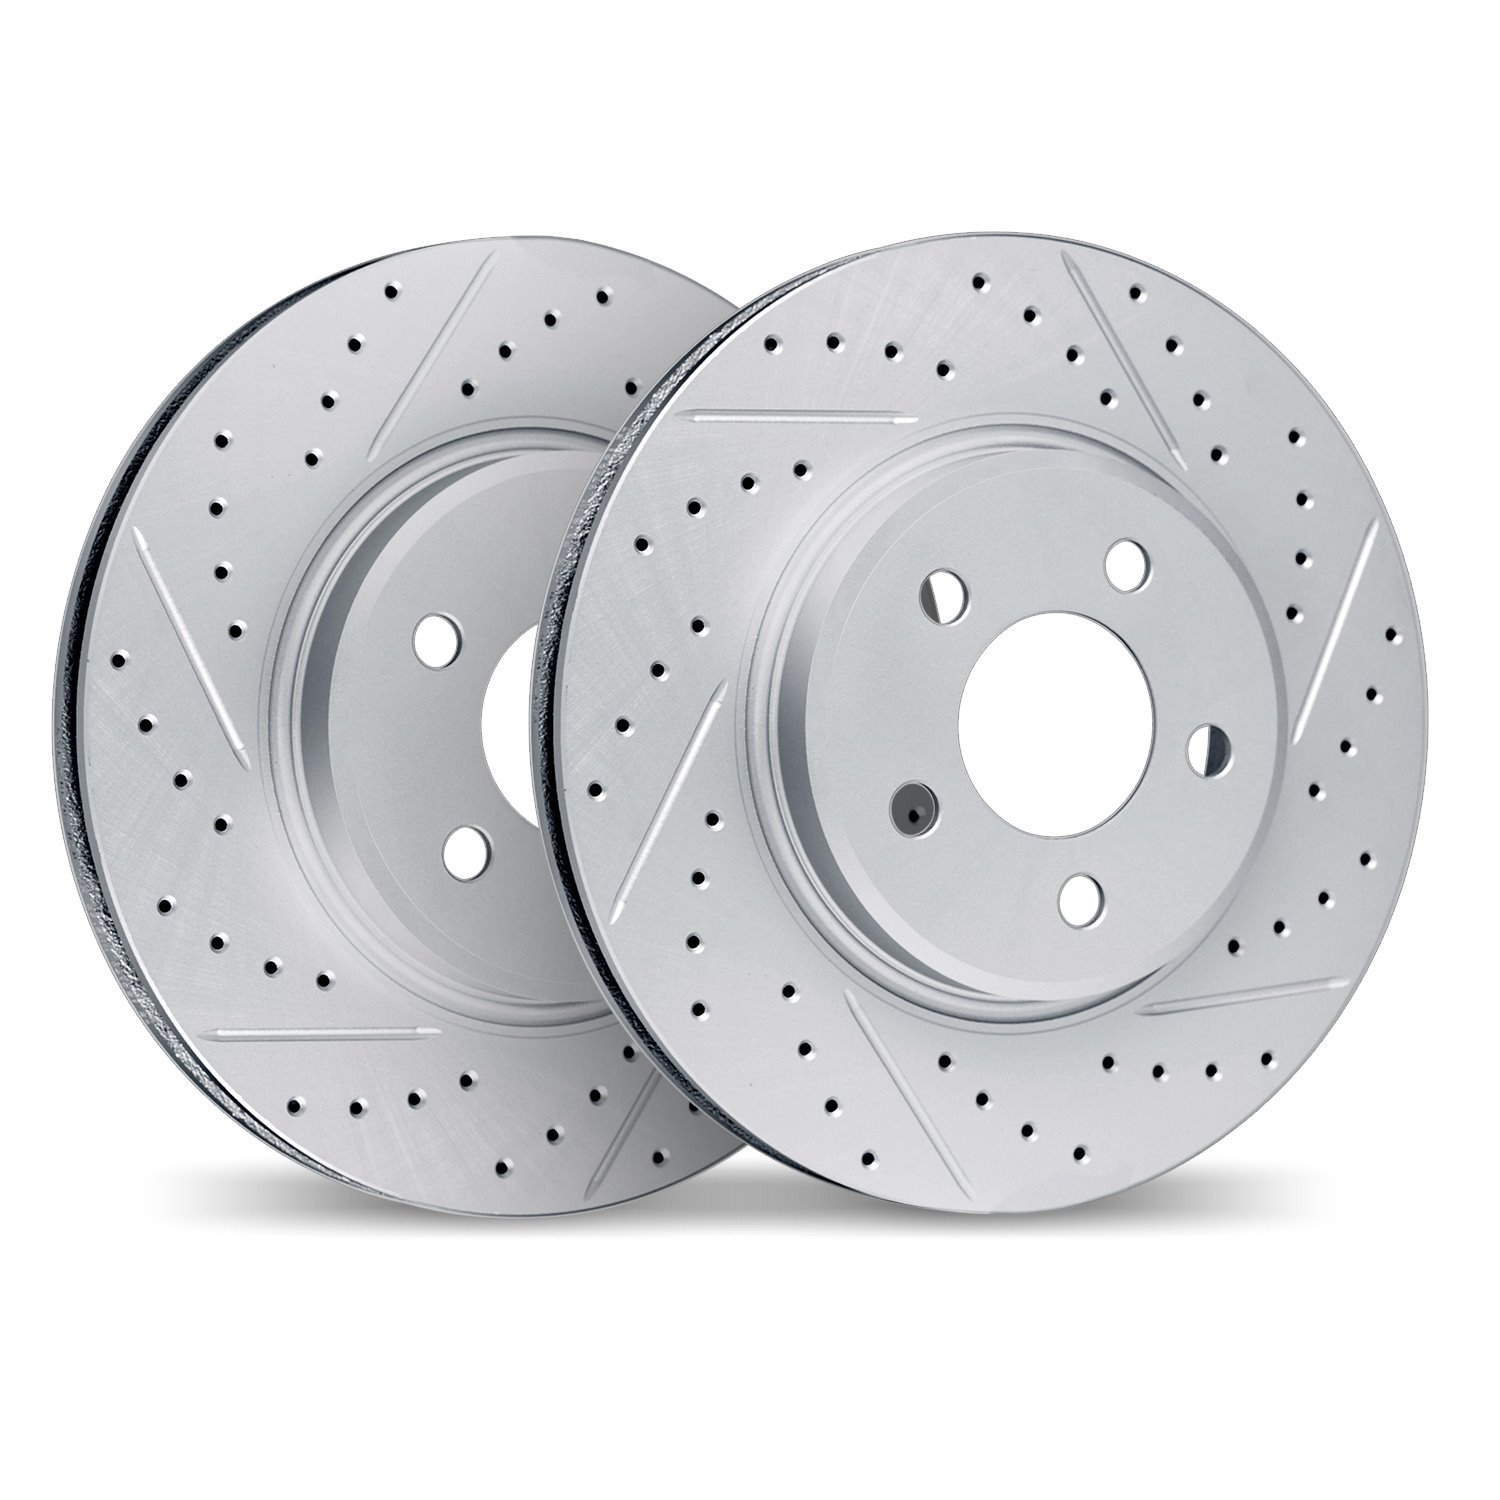 2002-66000 Geoperformance Drilled/Slotted Brake Rotors, 1971-1976 GM, Position: Front